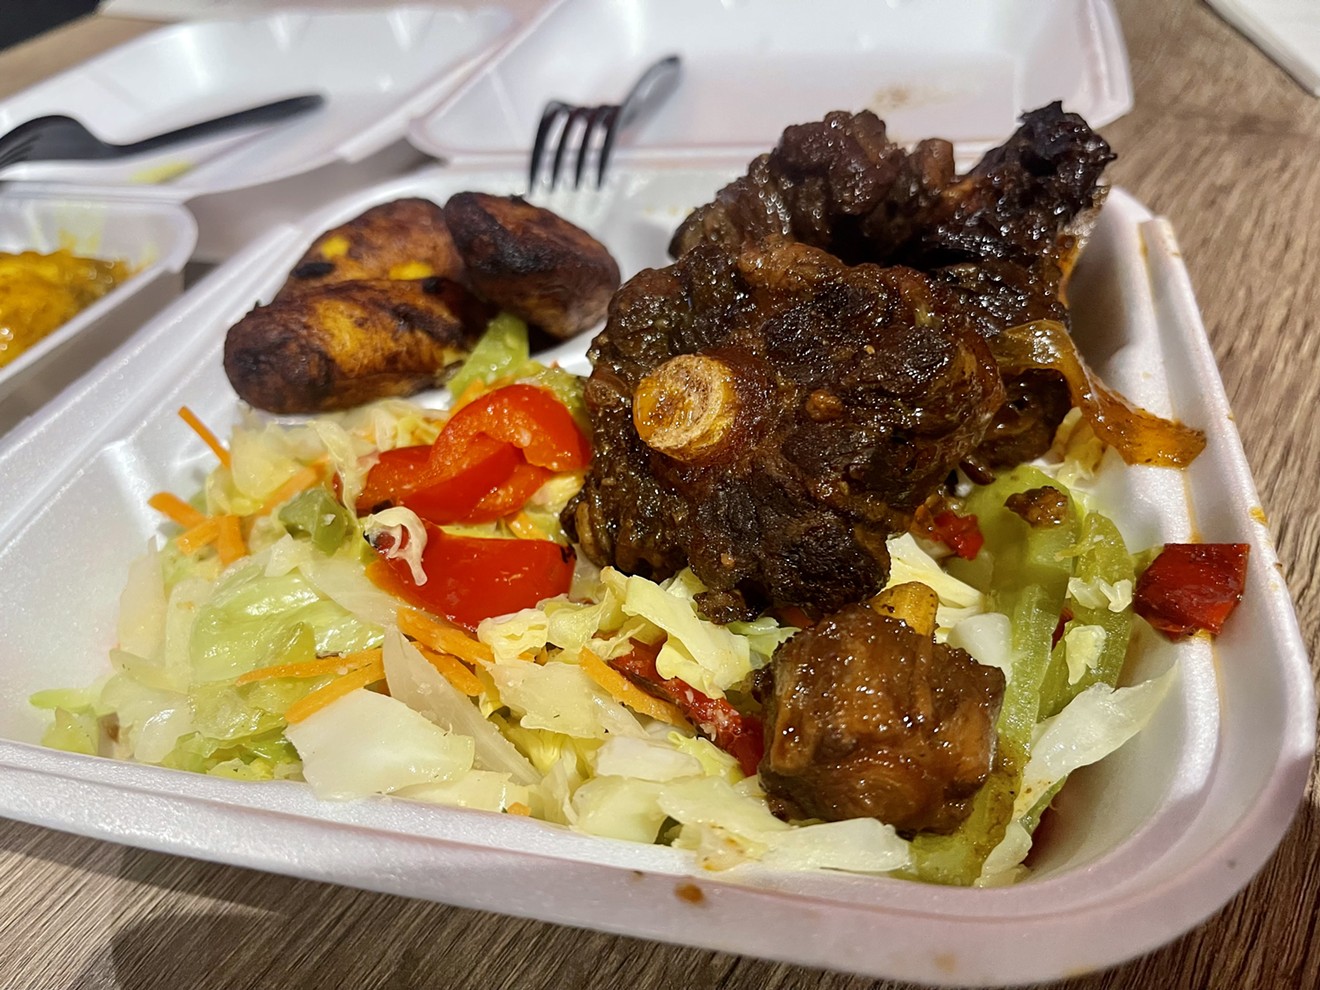 Ms. Martha's serves a wide selection of excellent Caribbean cuisine. Make sure to try the oxtails.